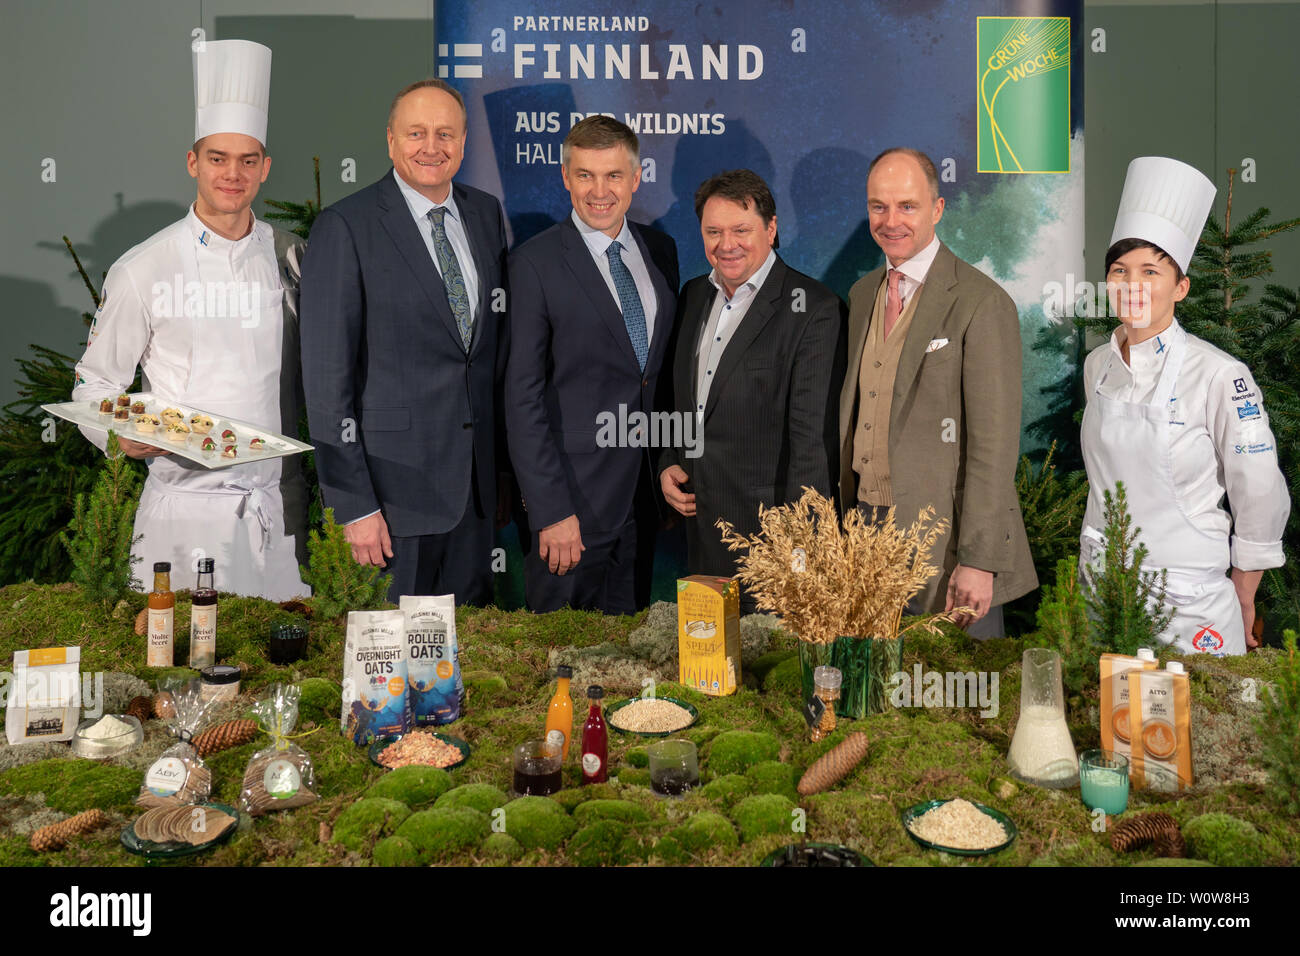 IGW 2019 - Culinary greetings from partner country Finland of the International Green Week Berlin 2019 to the German food and agriculture industry - Samuel Mikander, Chief Culinary Team of Finland; Joachim Rukwied, President of the German Farmers' Association; Juha Marttila, President of the Federation of Agricultural Producers and Forest Owners (MTK), Finland; Christoph Minhoff, Chief Executive of the Federal Food Law and Food Science (BLL) and the Federal Association of the German Food Industry (BVE); Dr. Christian Göke, CEO, Messe Berlin GmbH; Katja Tuomainen, Chief Culinary Team of Finland Stock Photo